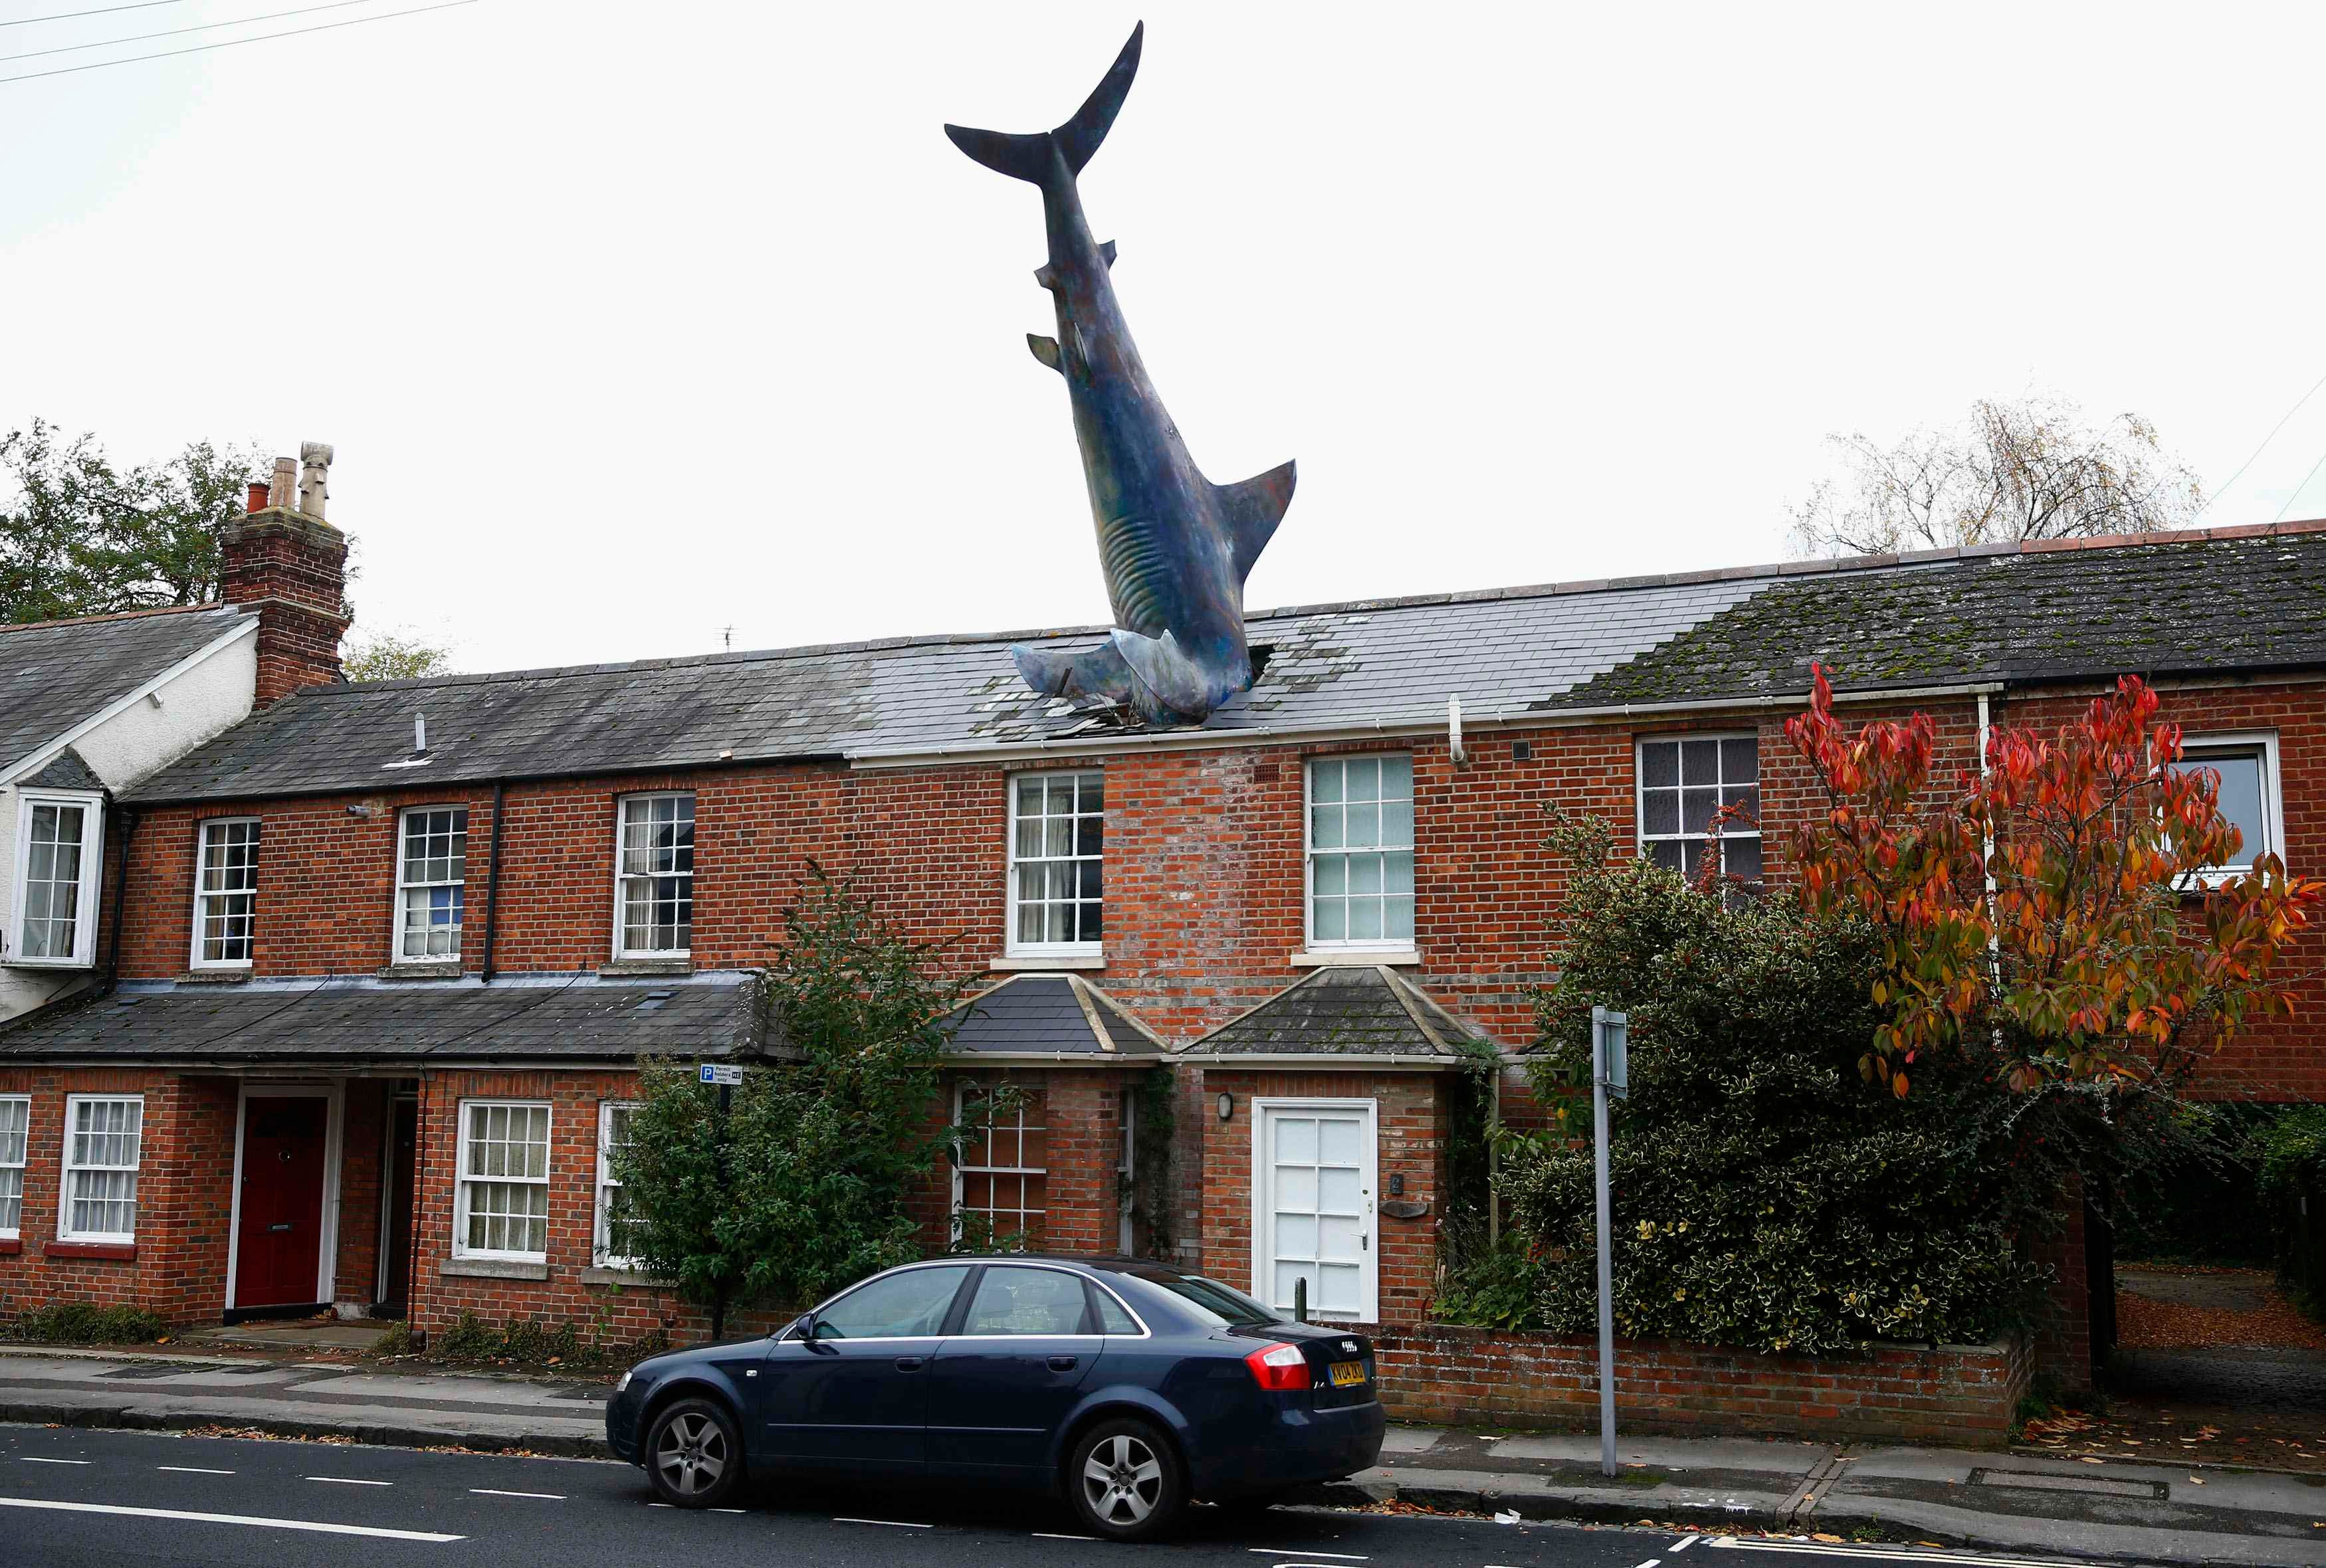 The Headington Shark in Oxford is a popular local attraction